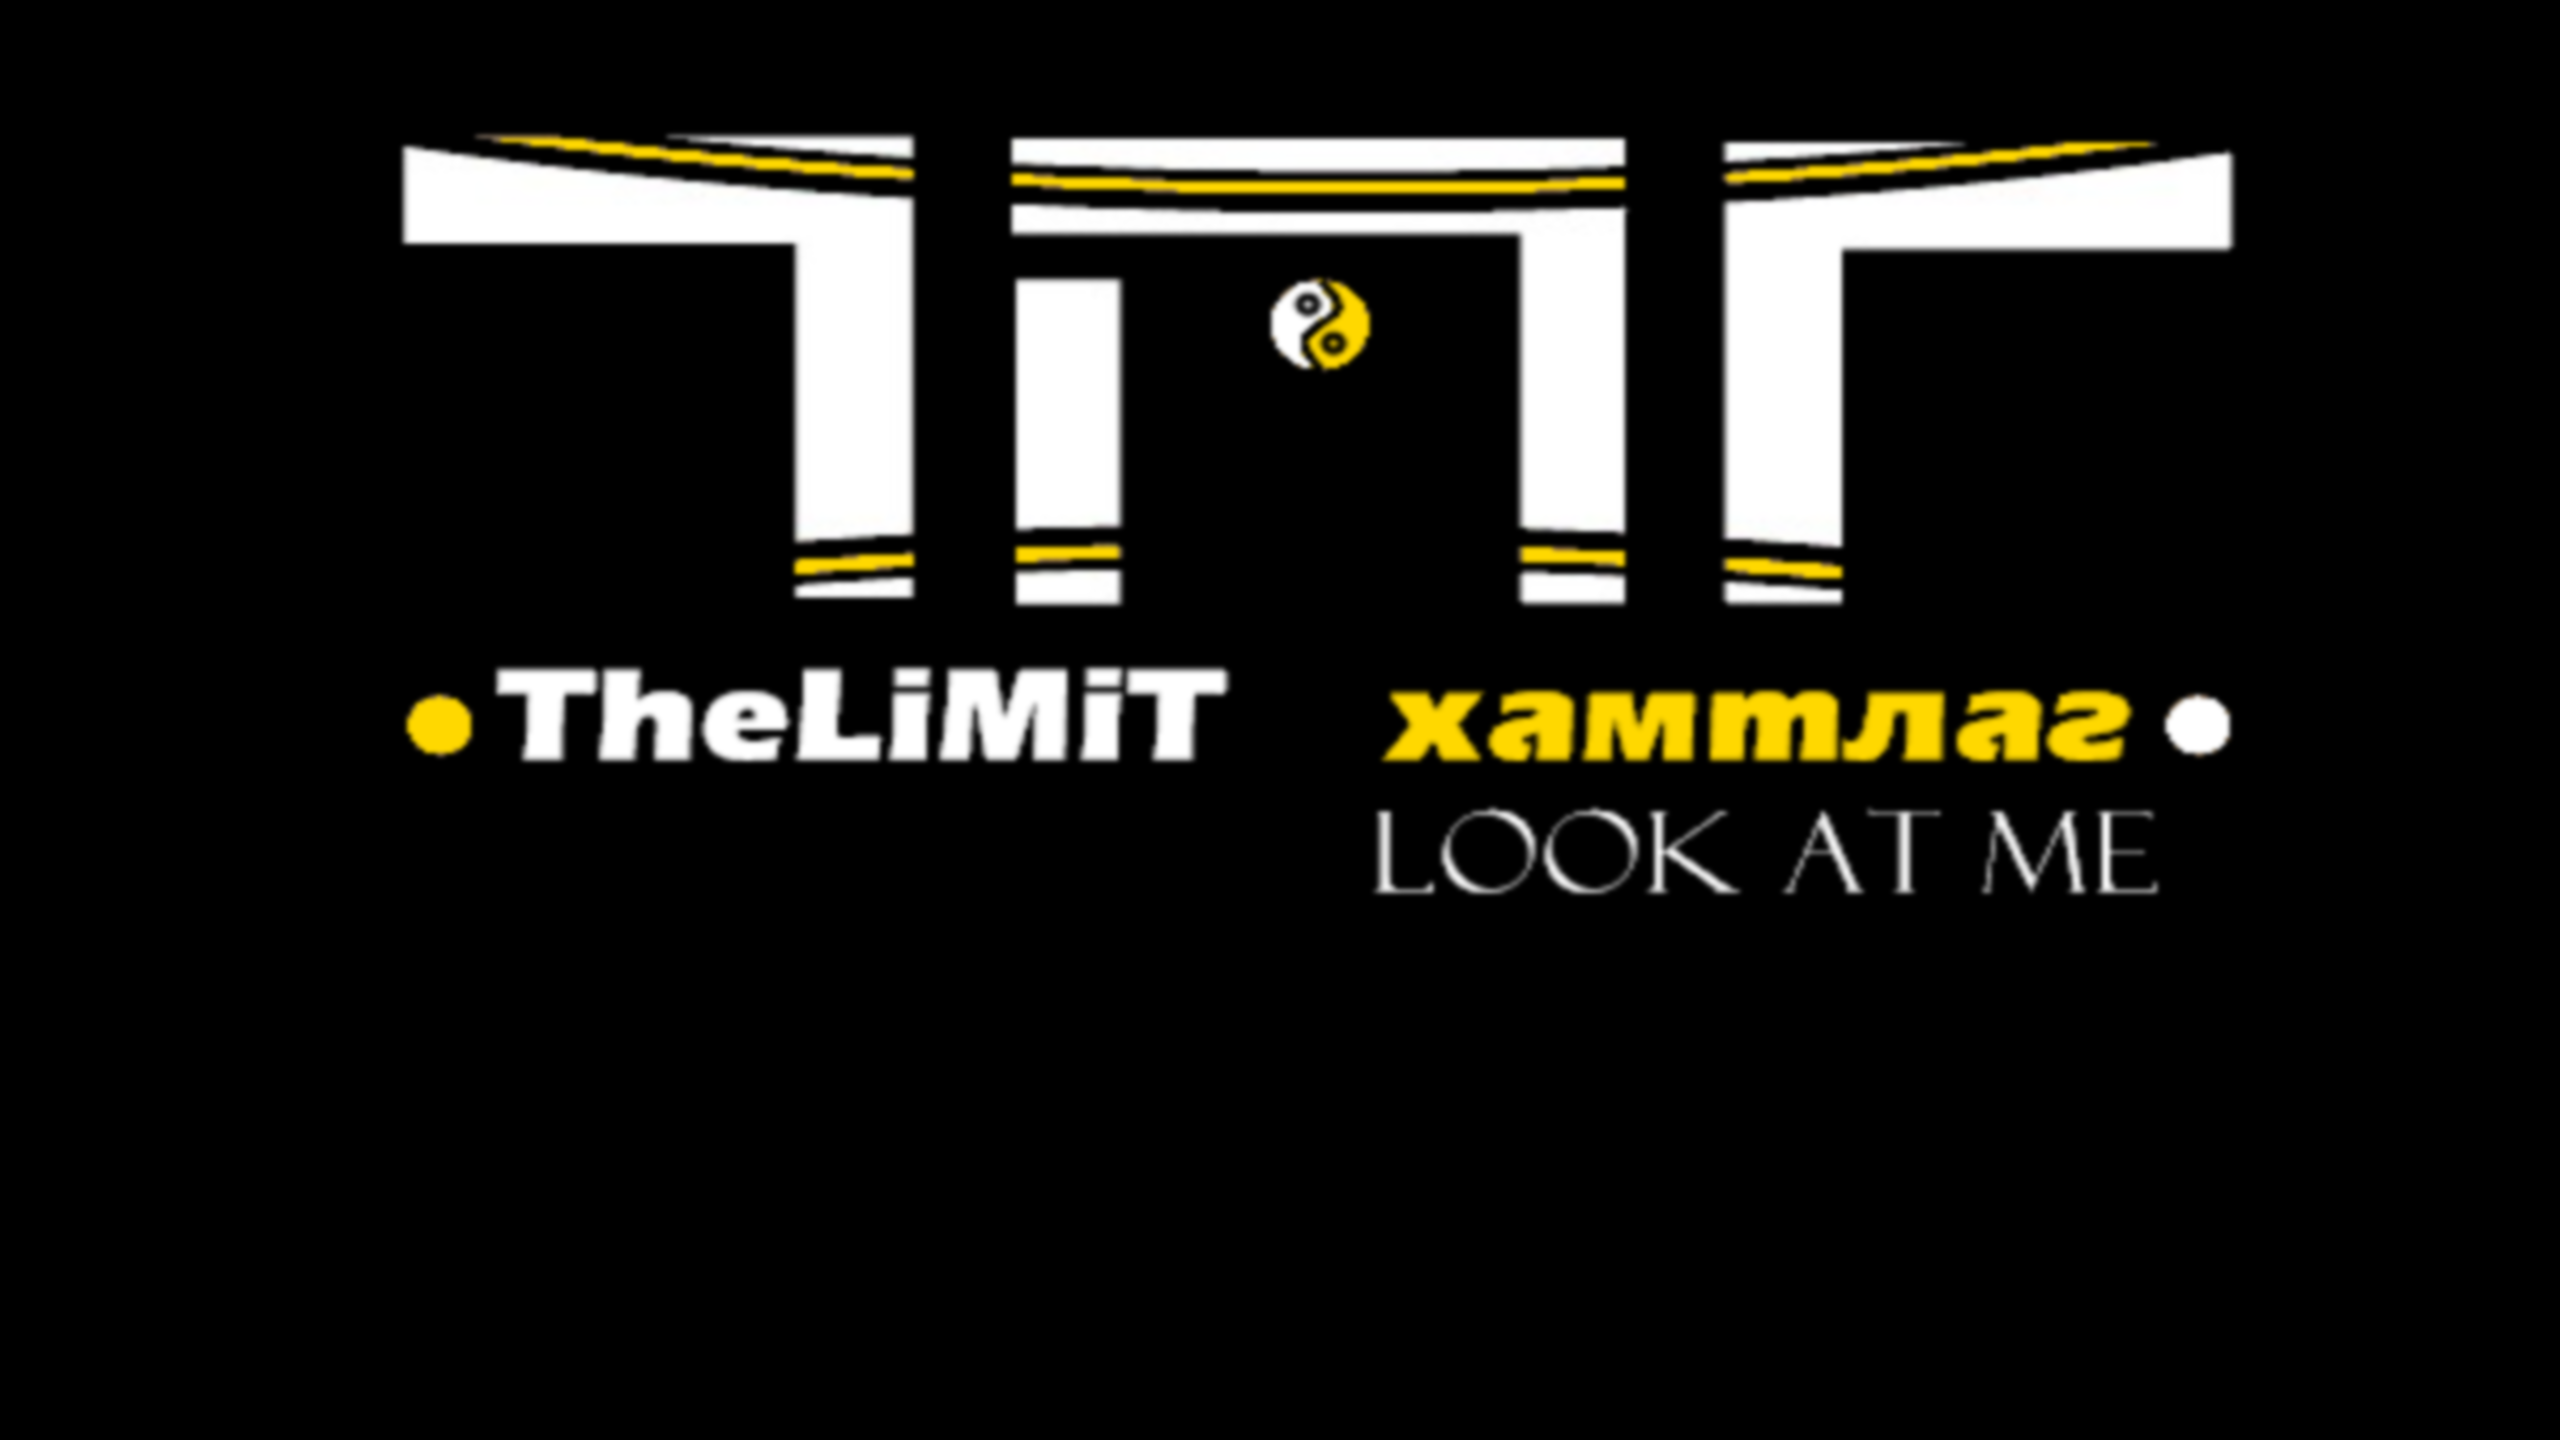 TheLiMiT – Look at me